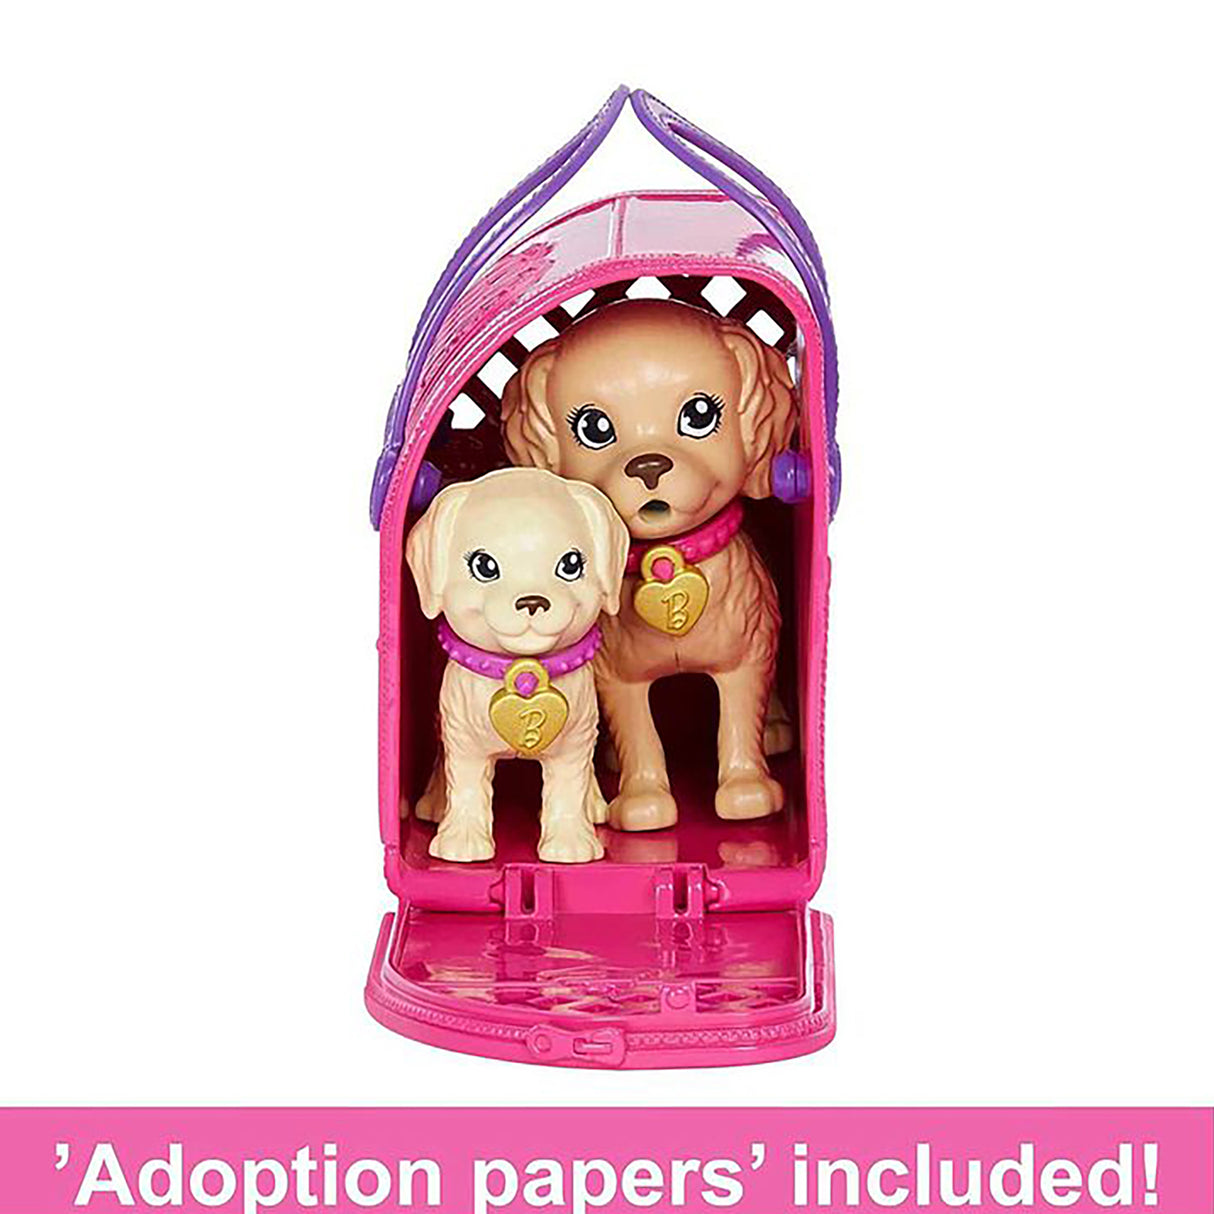 Barbie Pup Adoption Doll and Accessories HKD86